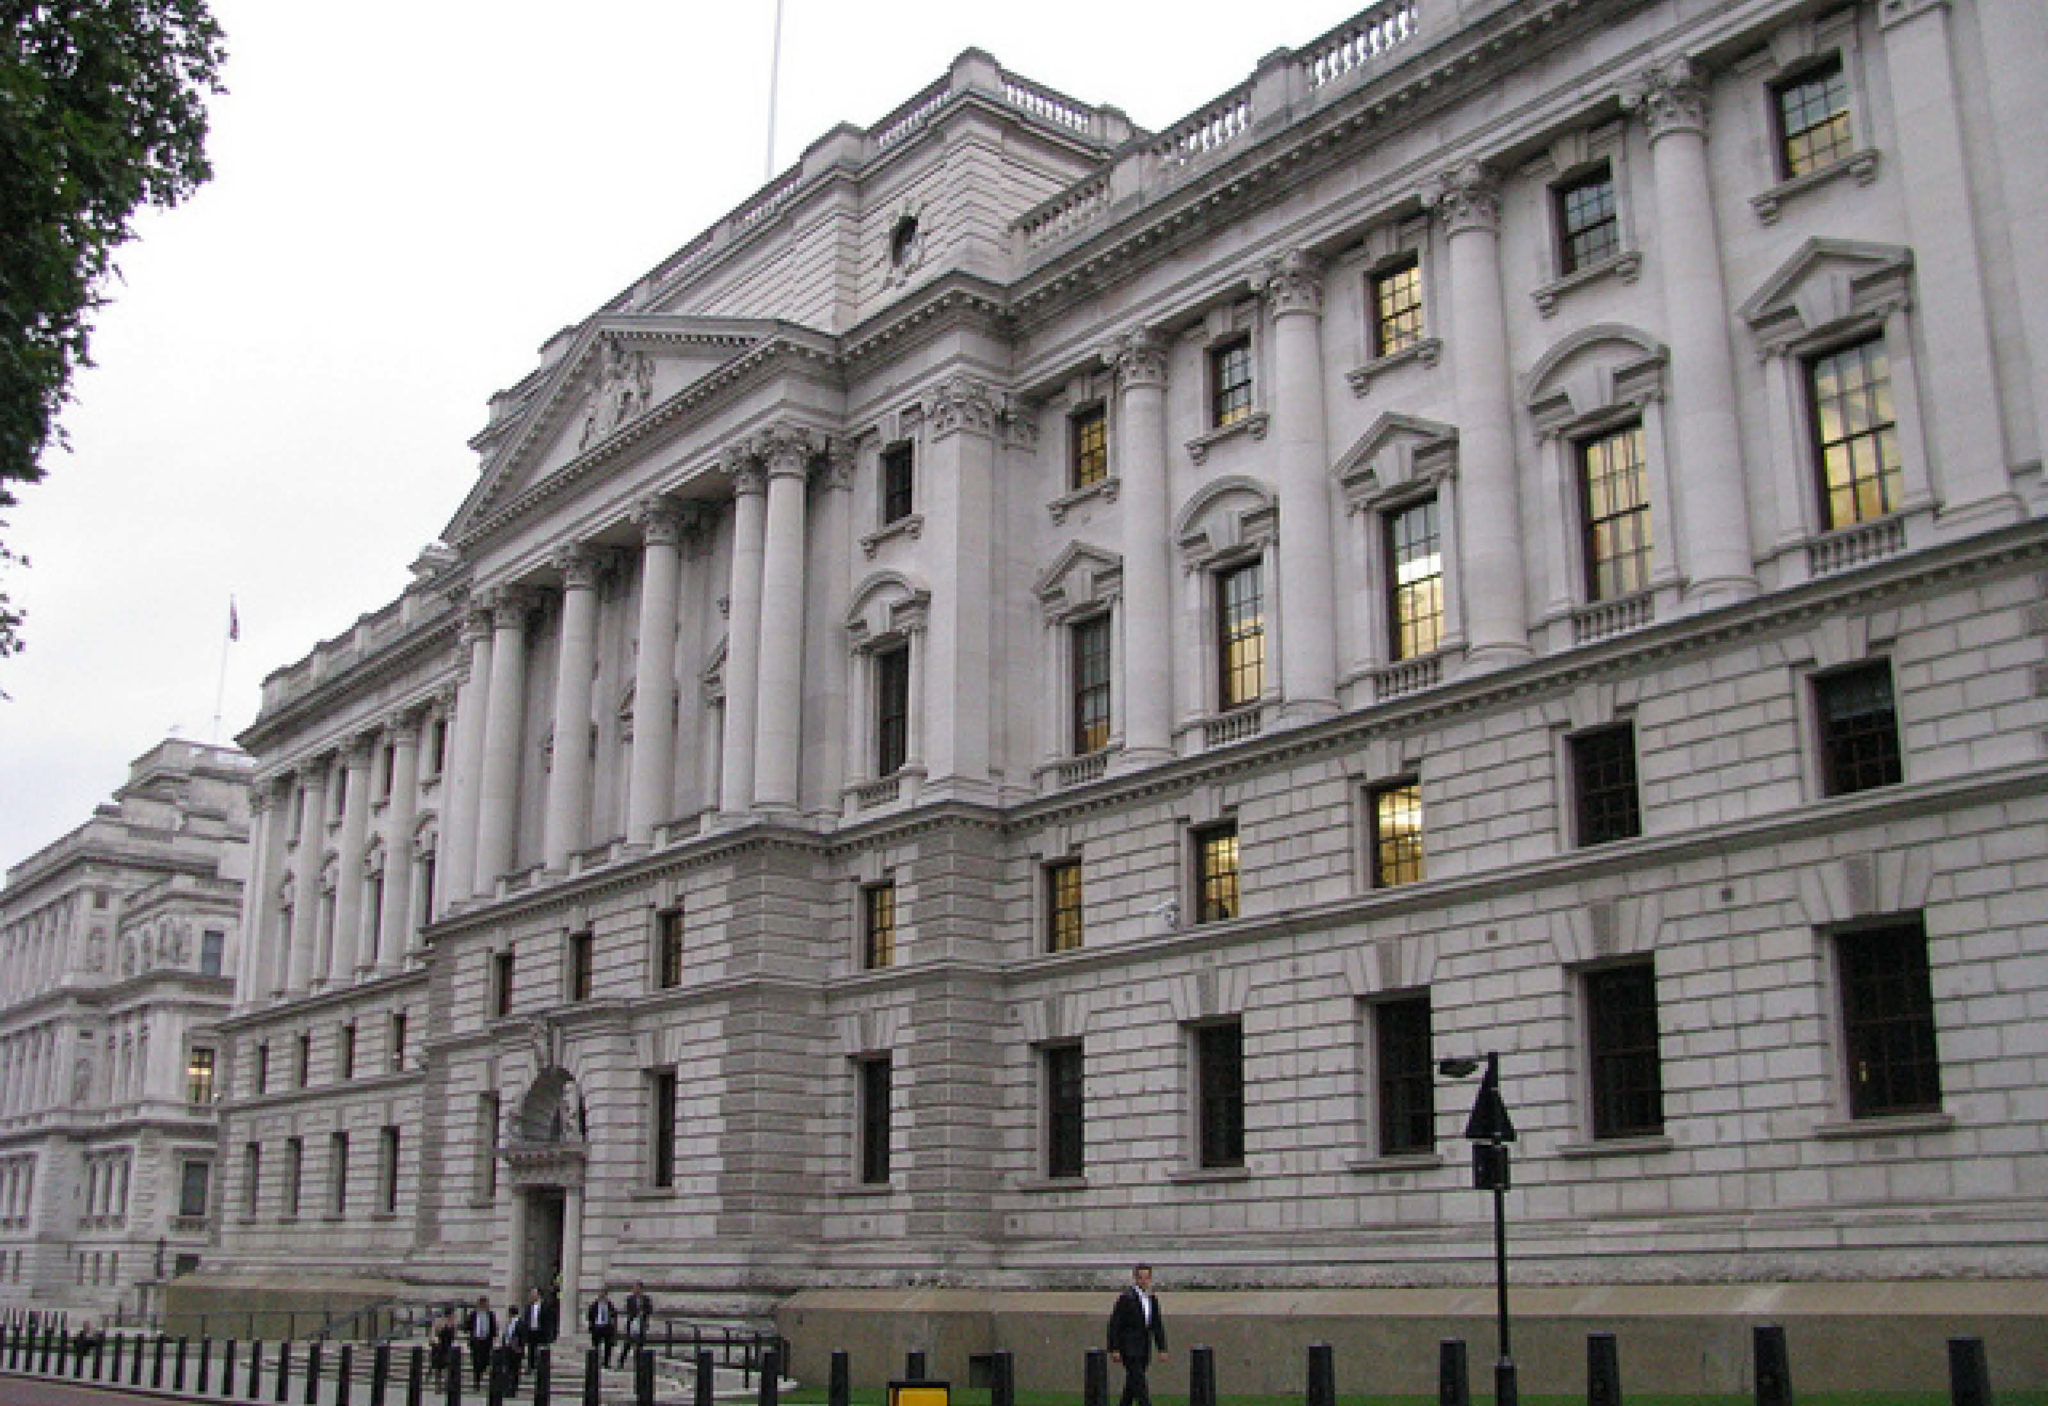 HM Treasury, Her Majestys Treasury, His Majestys Treasury, Government, Policy, Economic Policy, uk, cctv, cctv monitoring, surveillance, public space, welfare, security, security systems, control room, security design, access control, infrastructure, communication, compliance, regulations, excise